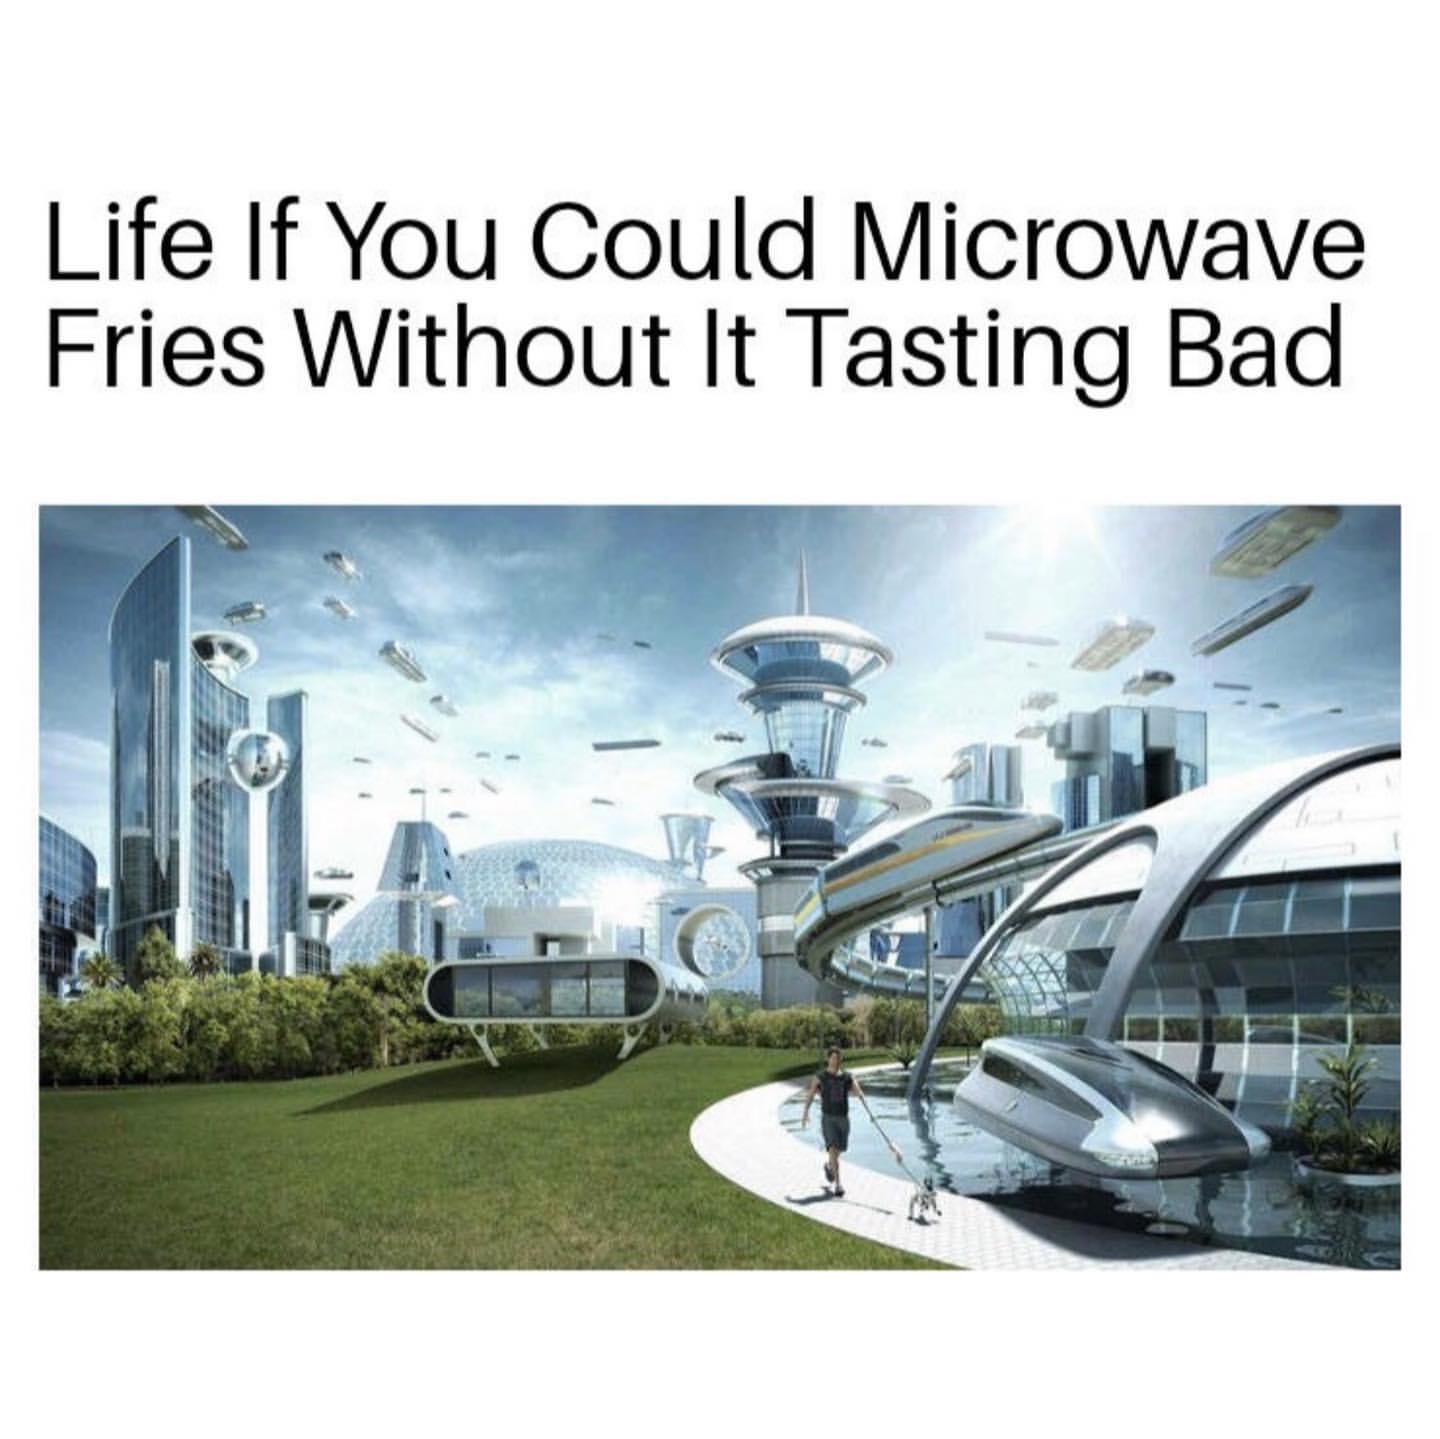 Life if you could microwave fries without it tasting bad.